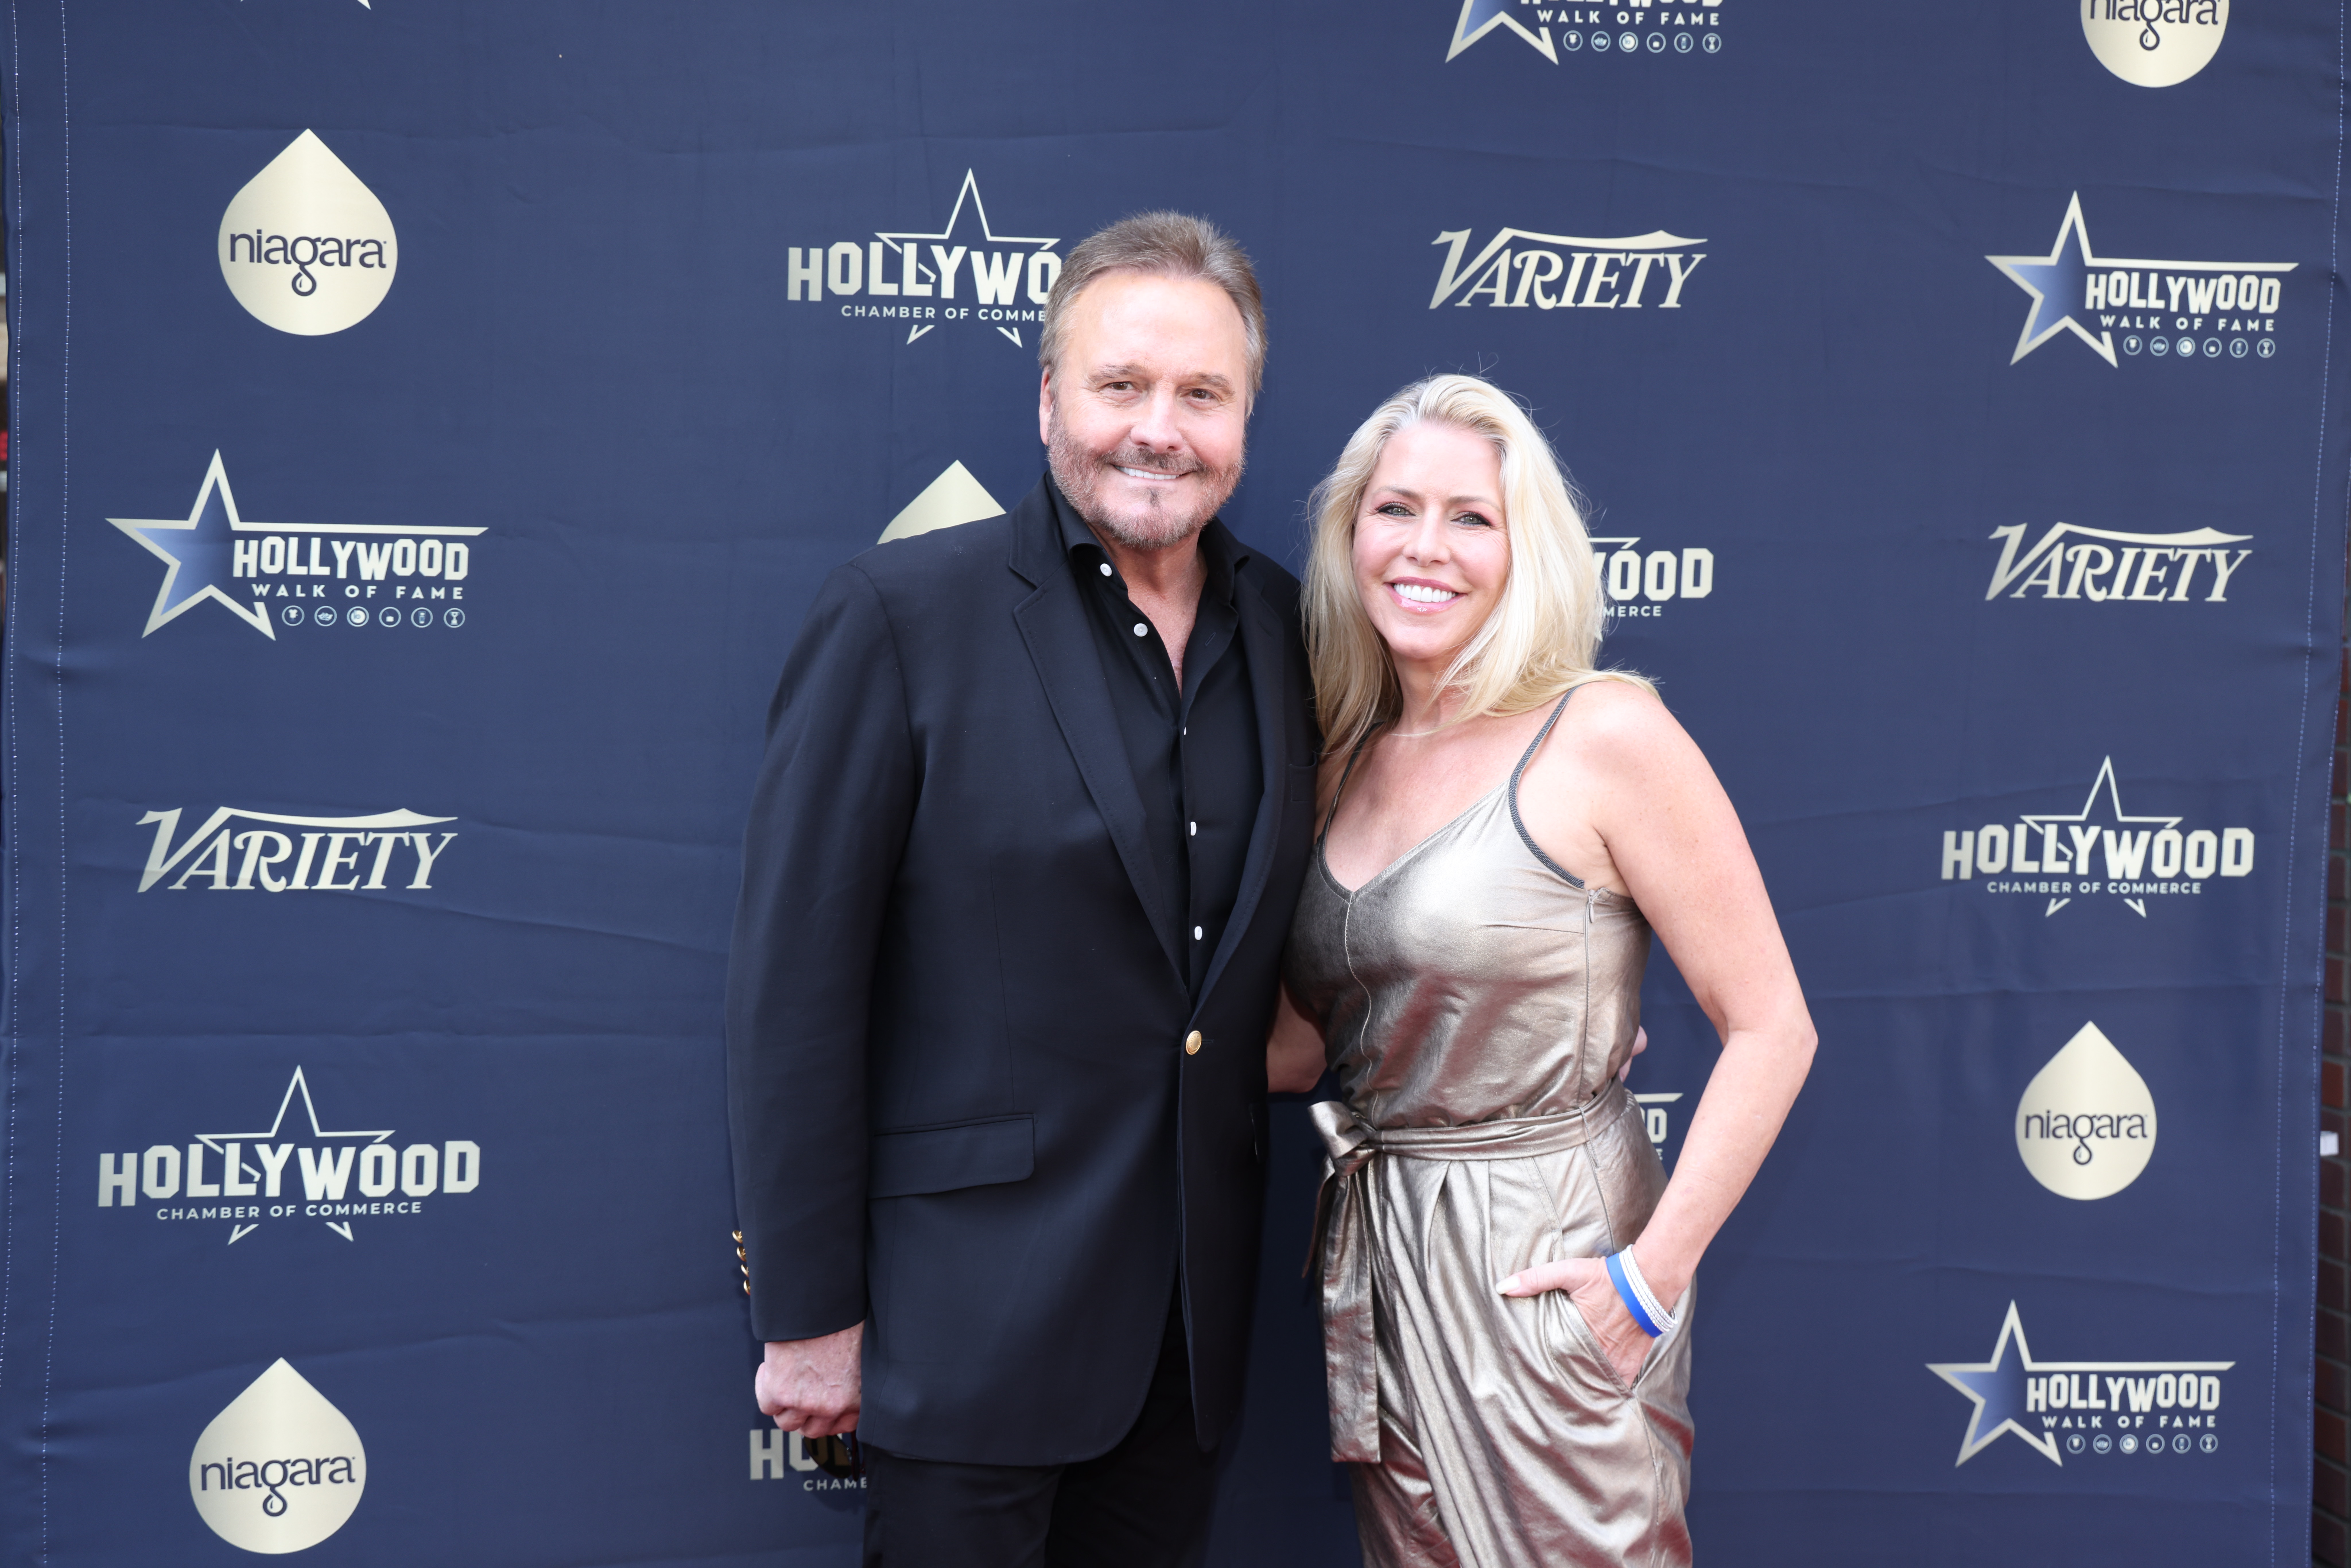 Narvel Blockstock, who Reba was married to from 1989 to 2015, wed Laura Stroud, who he has been with since his divorce